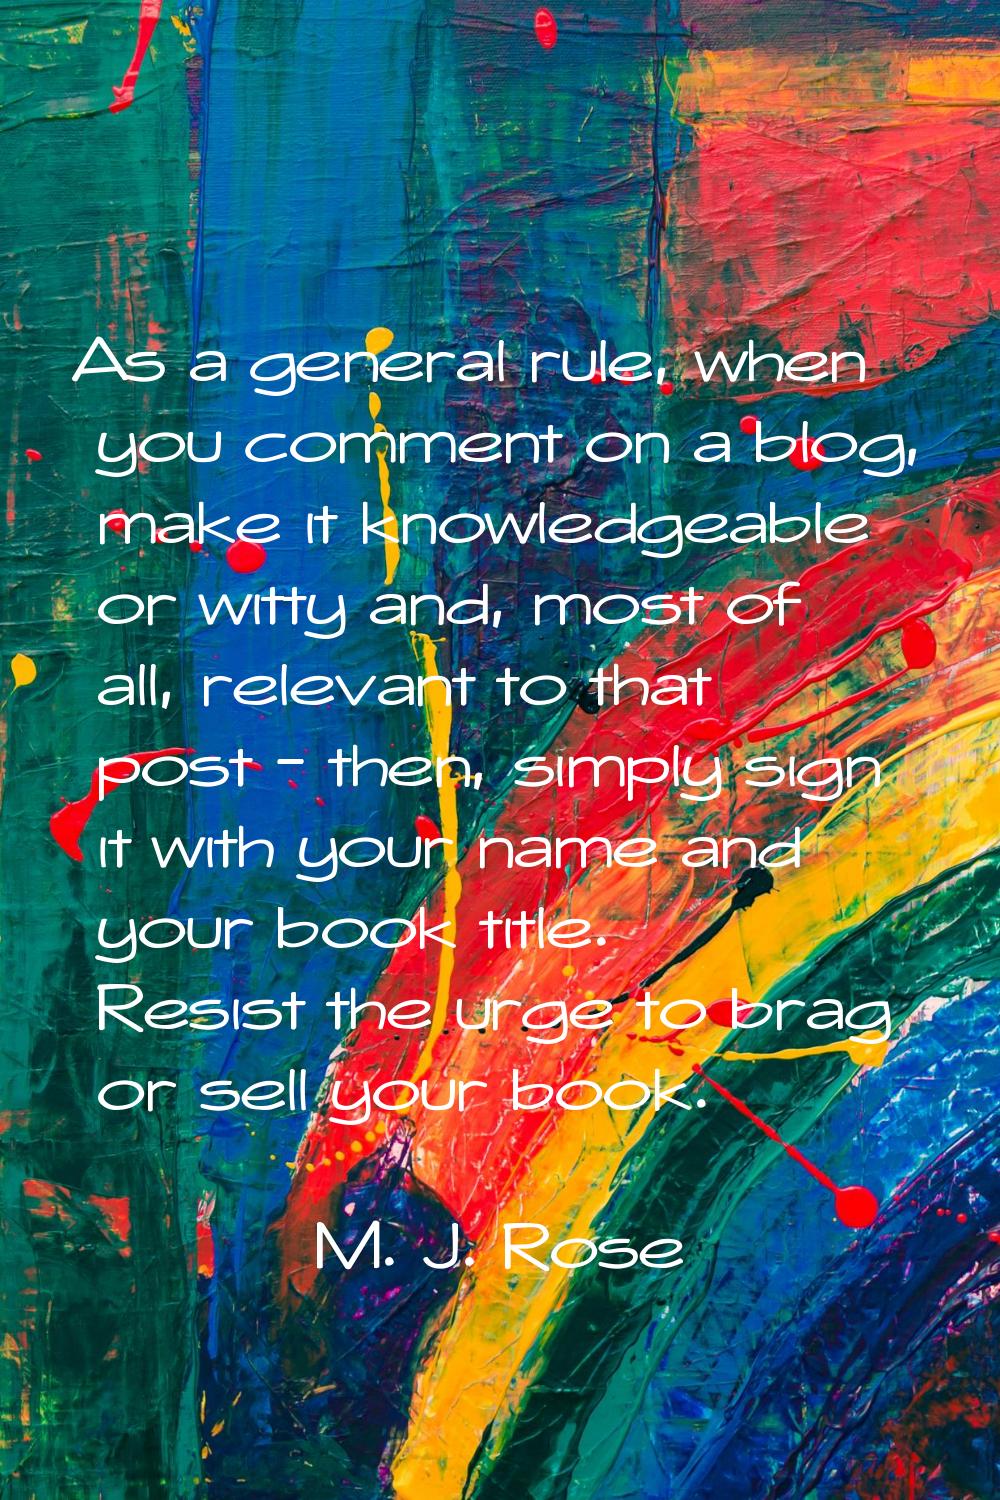 As a general rule, when you comment on a blog, make it knowledgeable or witty and, most of all, rel